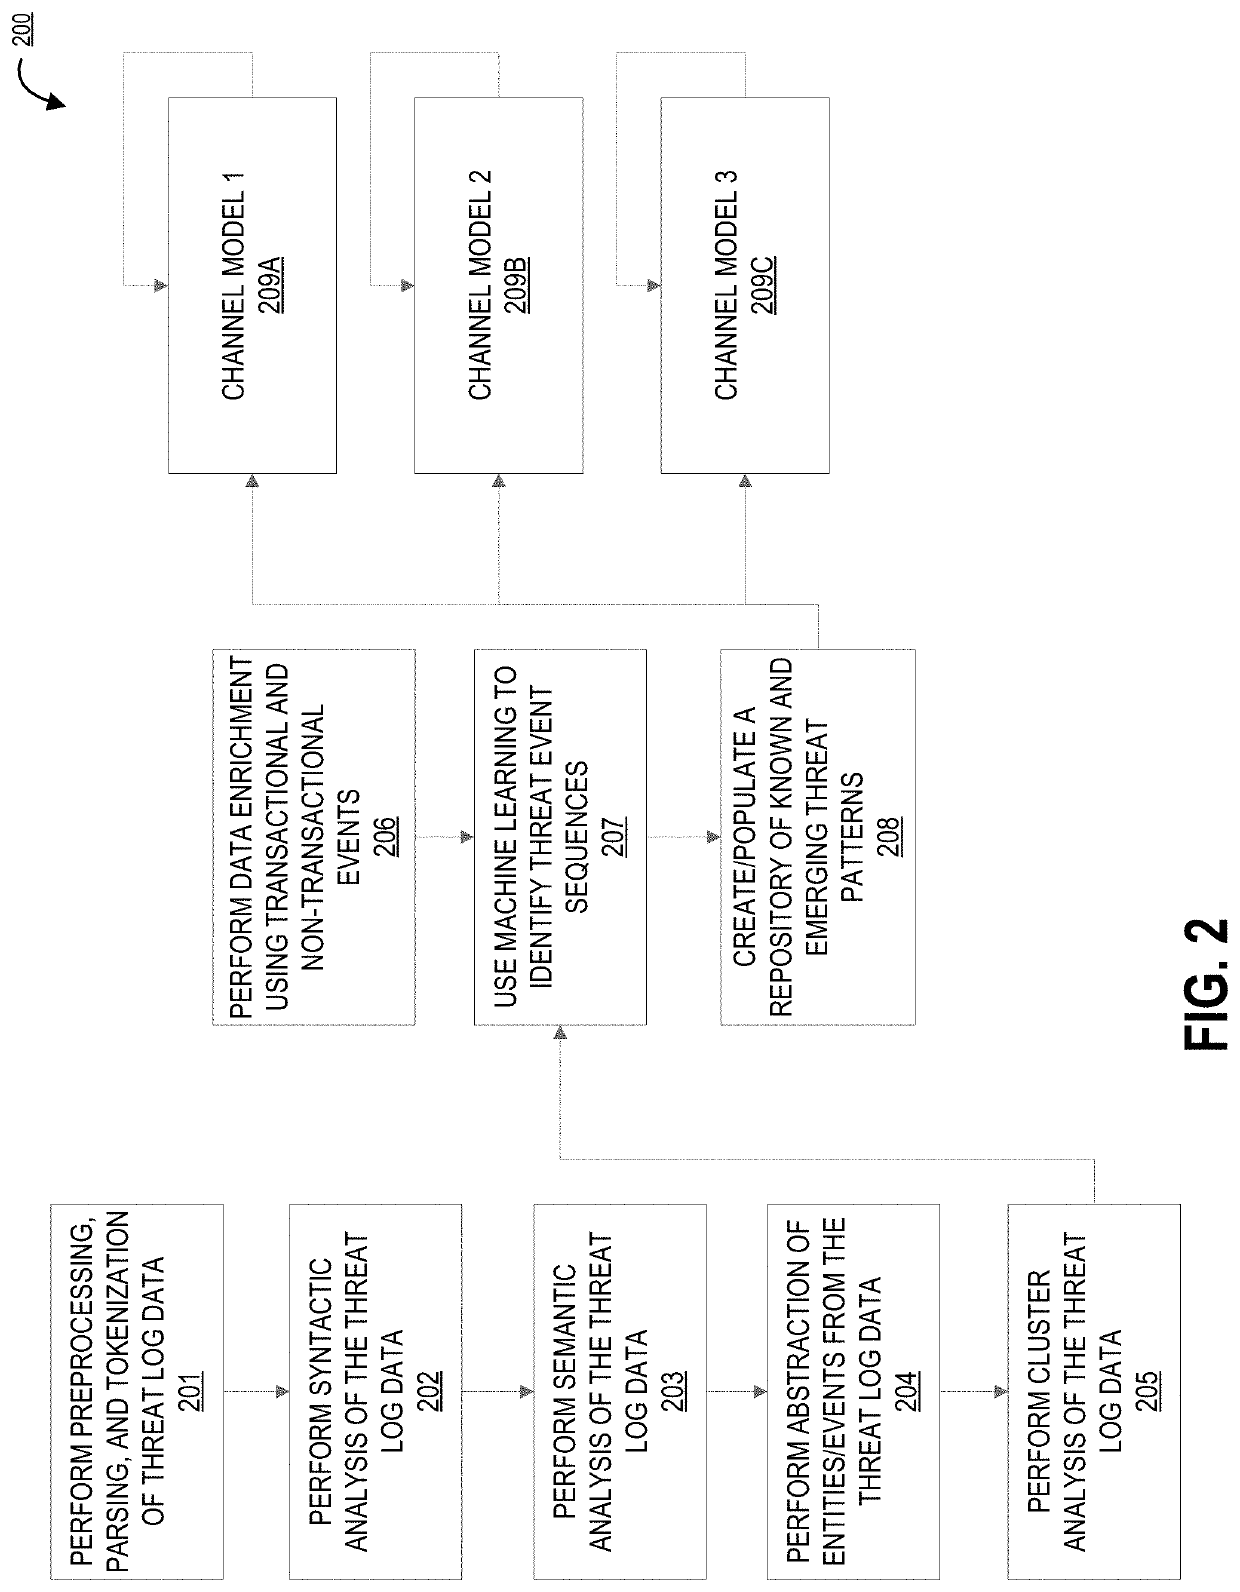 System for integrated natural language processing and event analysis for threat detection in computing systems